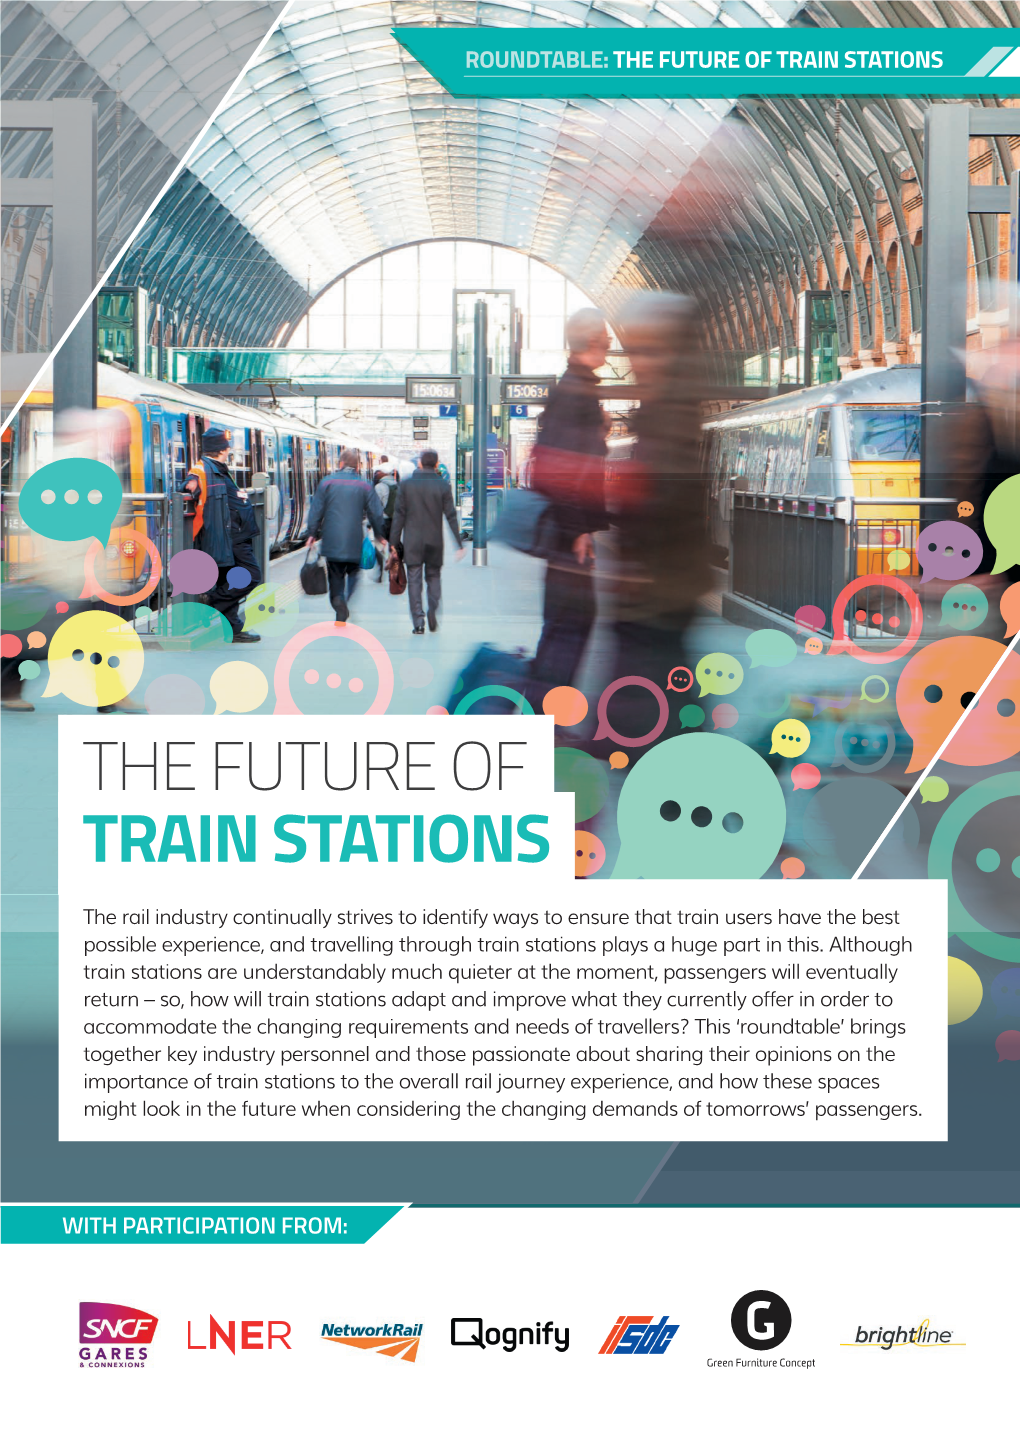 The Future of Train Stations